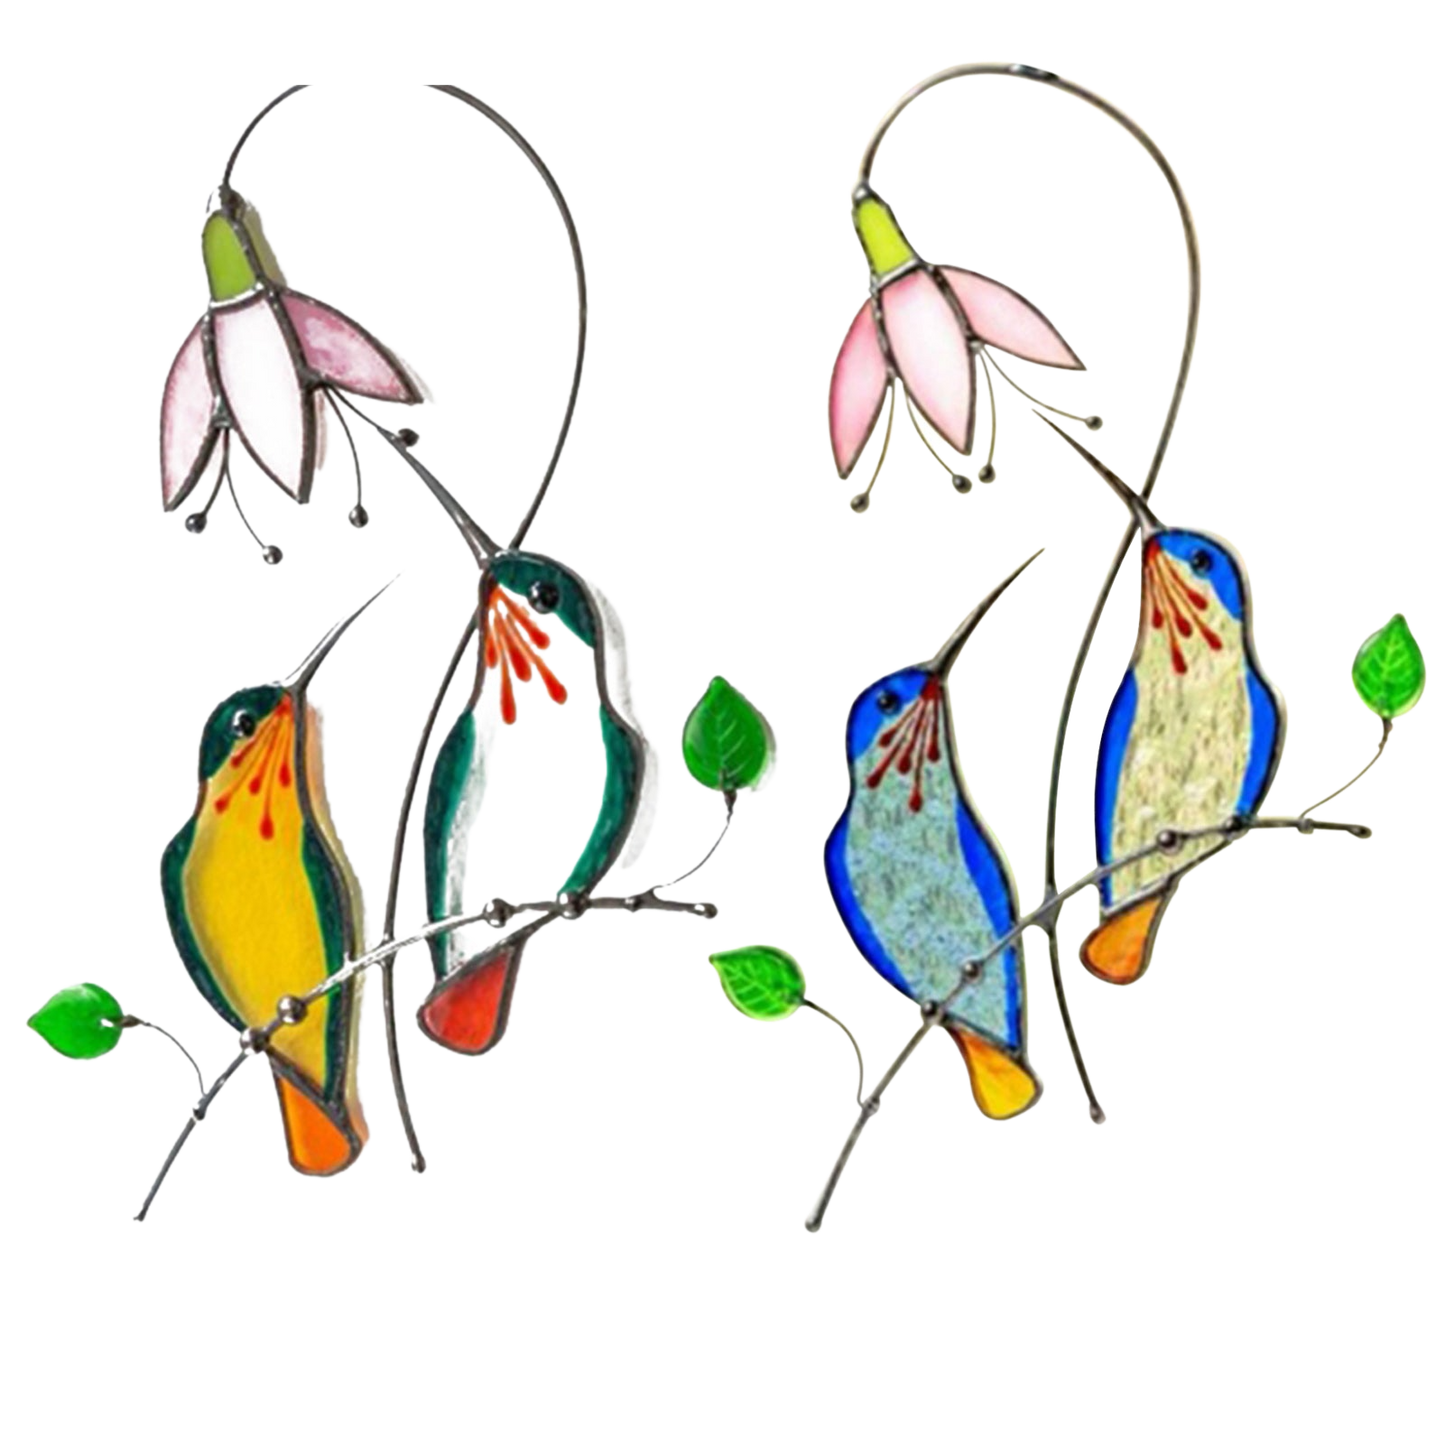 Window Hanging Small Bird Ornament Stained Glass Home Wall Decoration For Outdoor Garden Memorial Handicrafts Gift For Good Luck - Home Decor Gifts and More